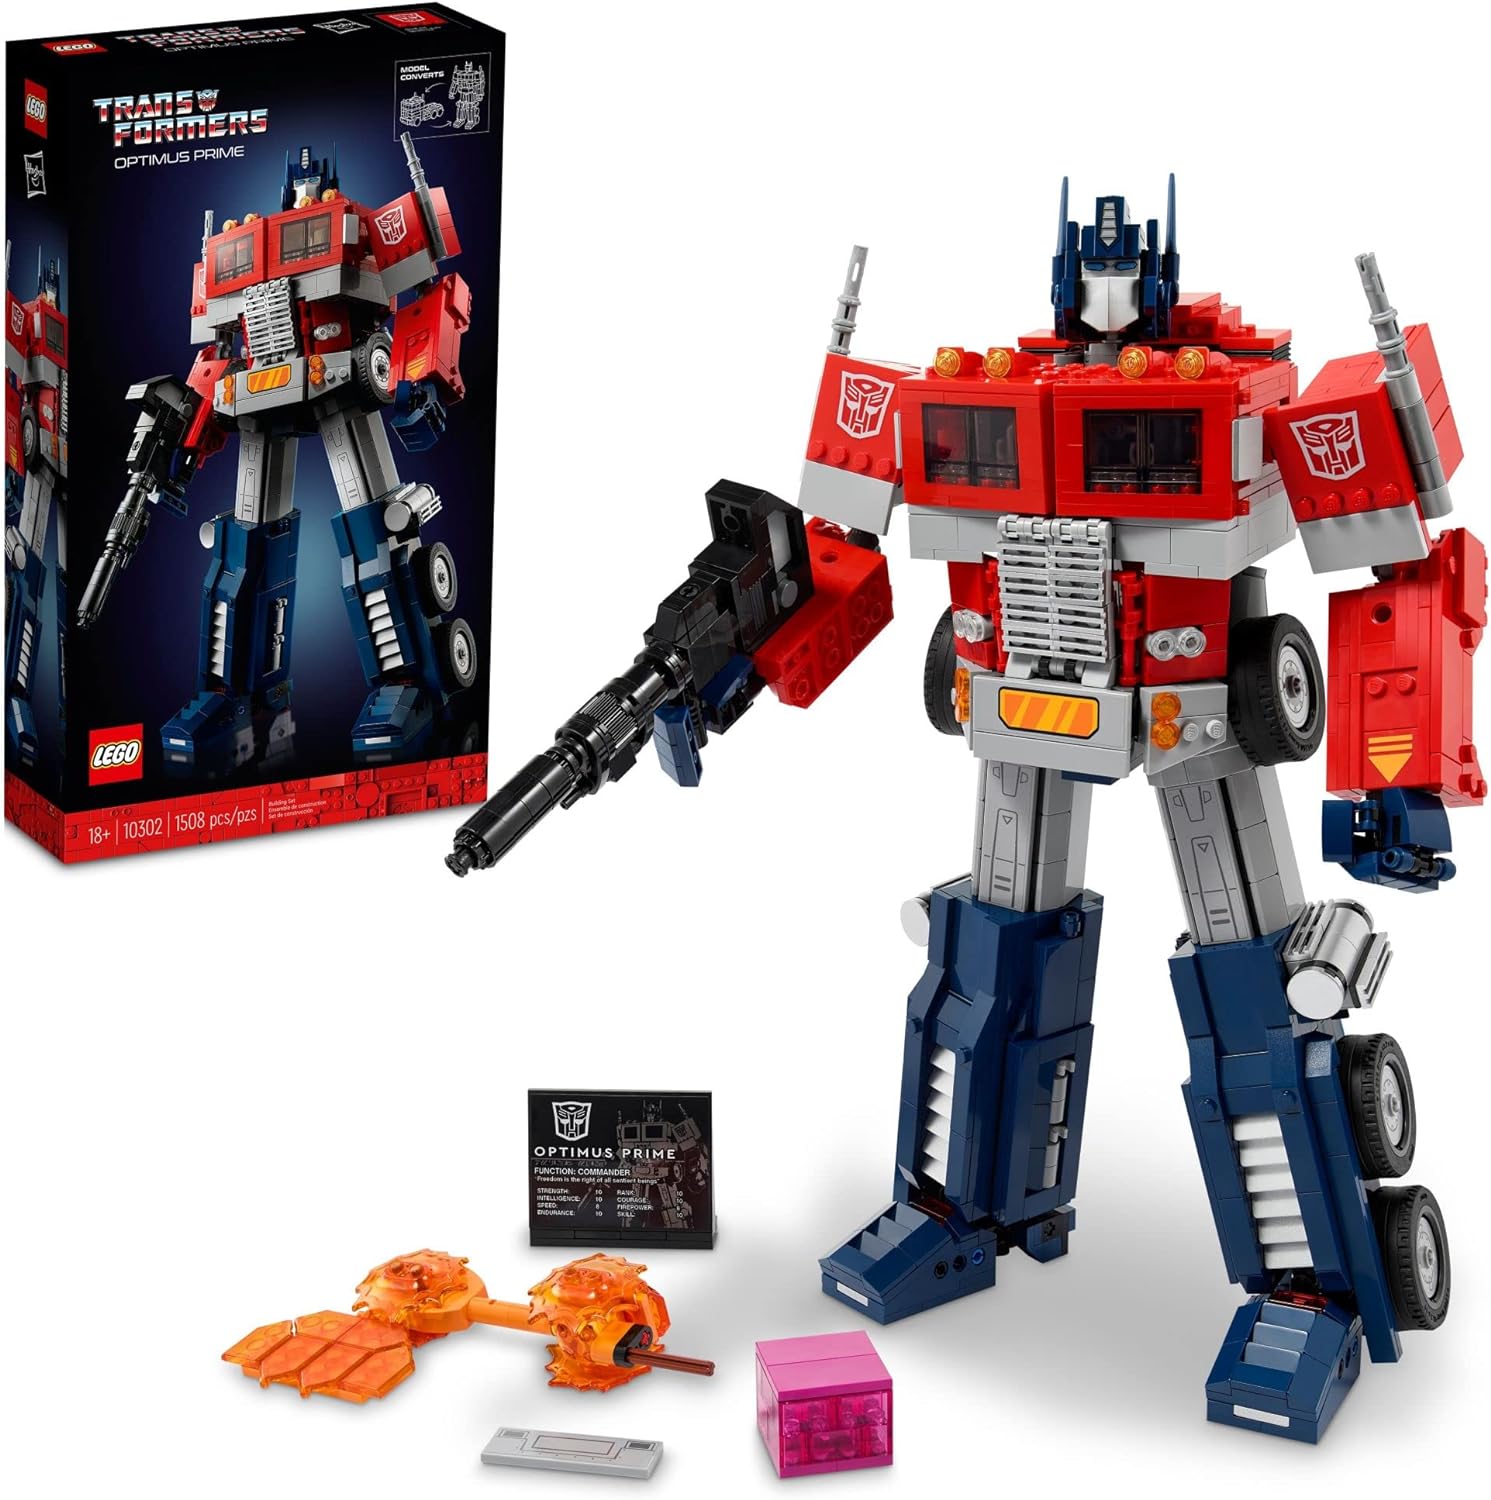 Save 15% Off the LEGO Transformers Optimus Prime 1,508-Piece Building Kit